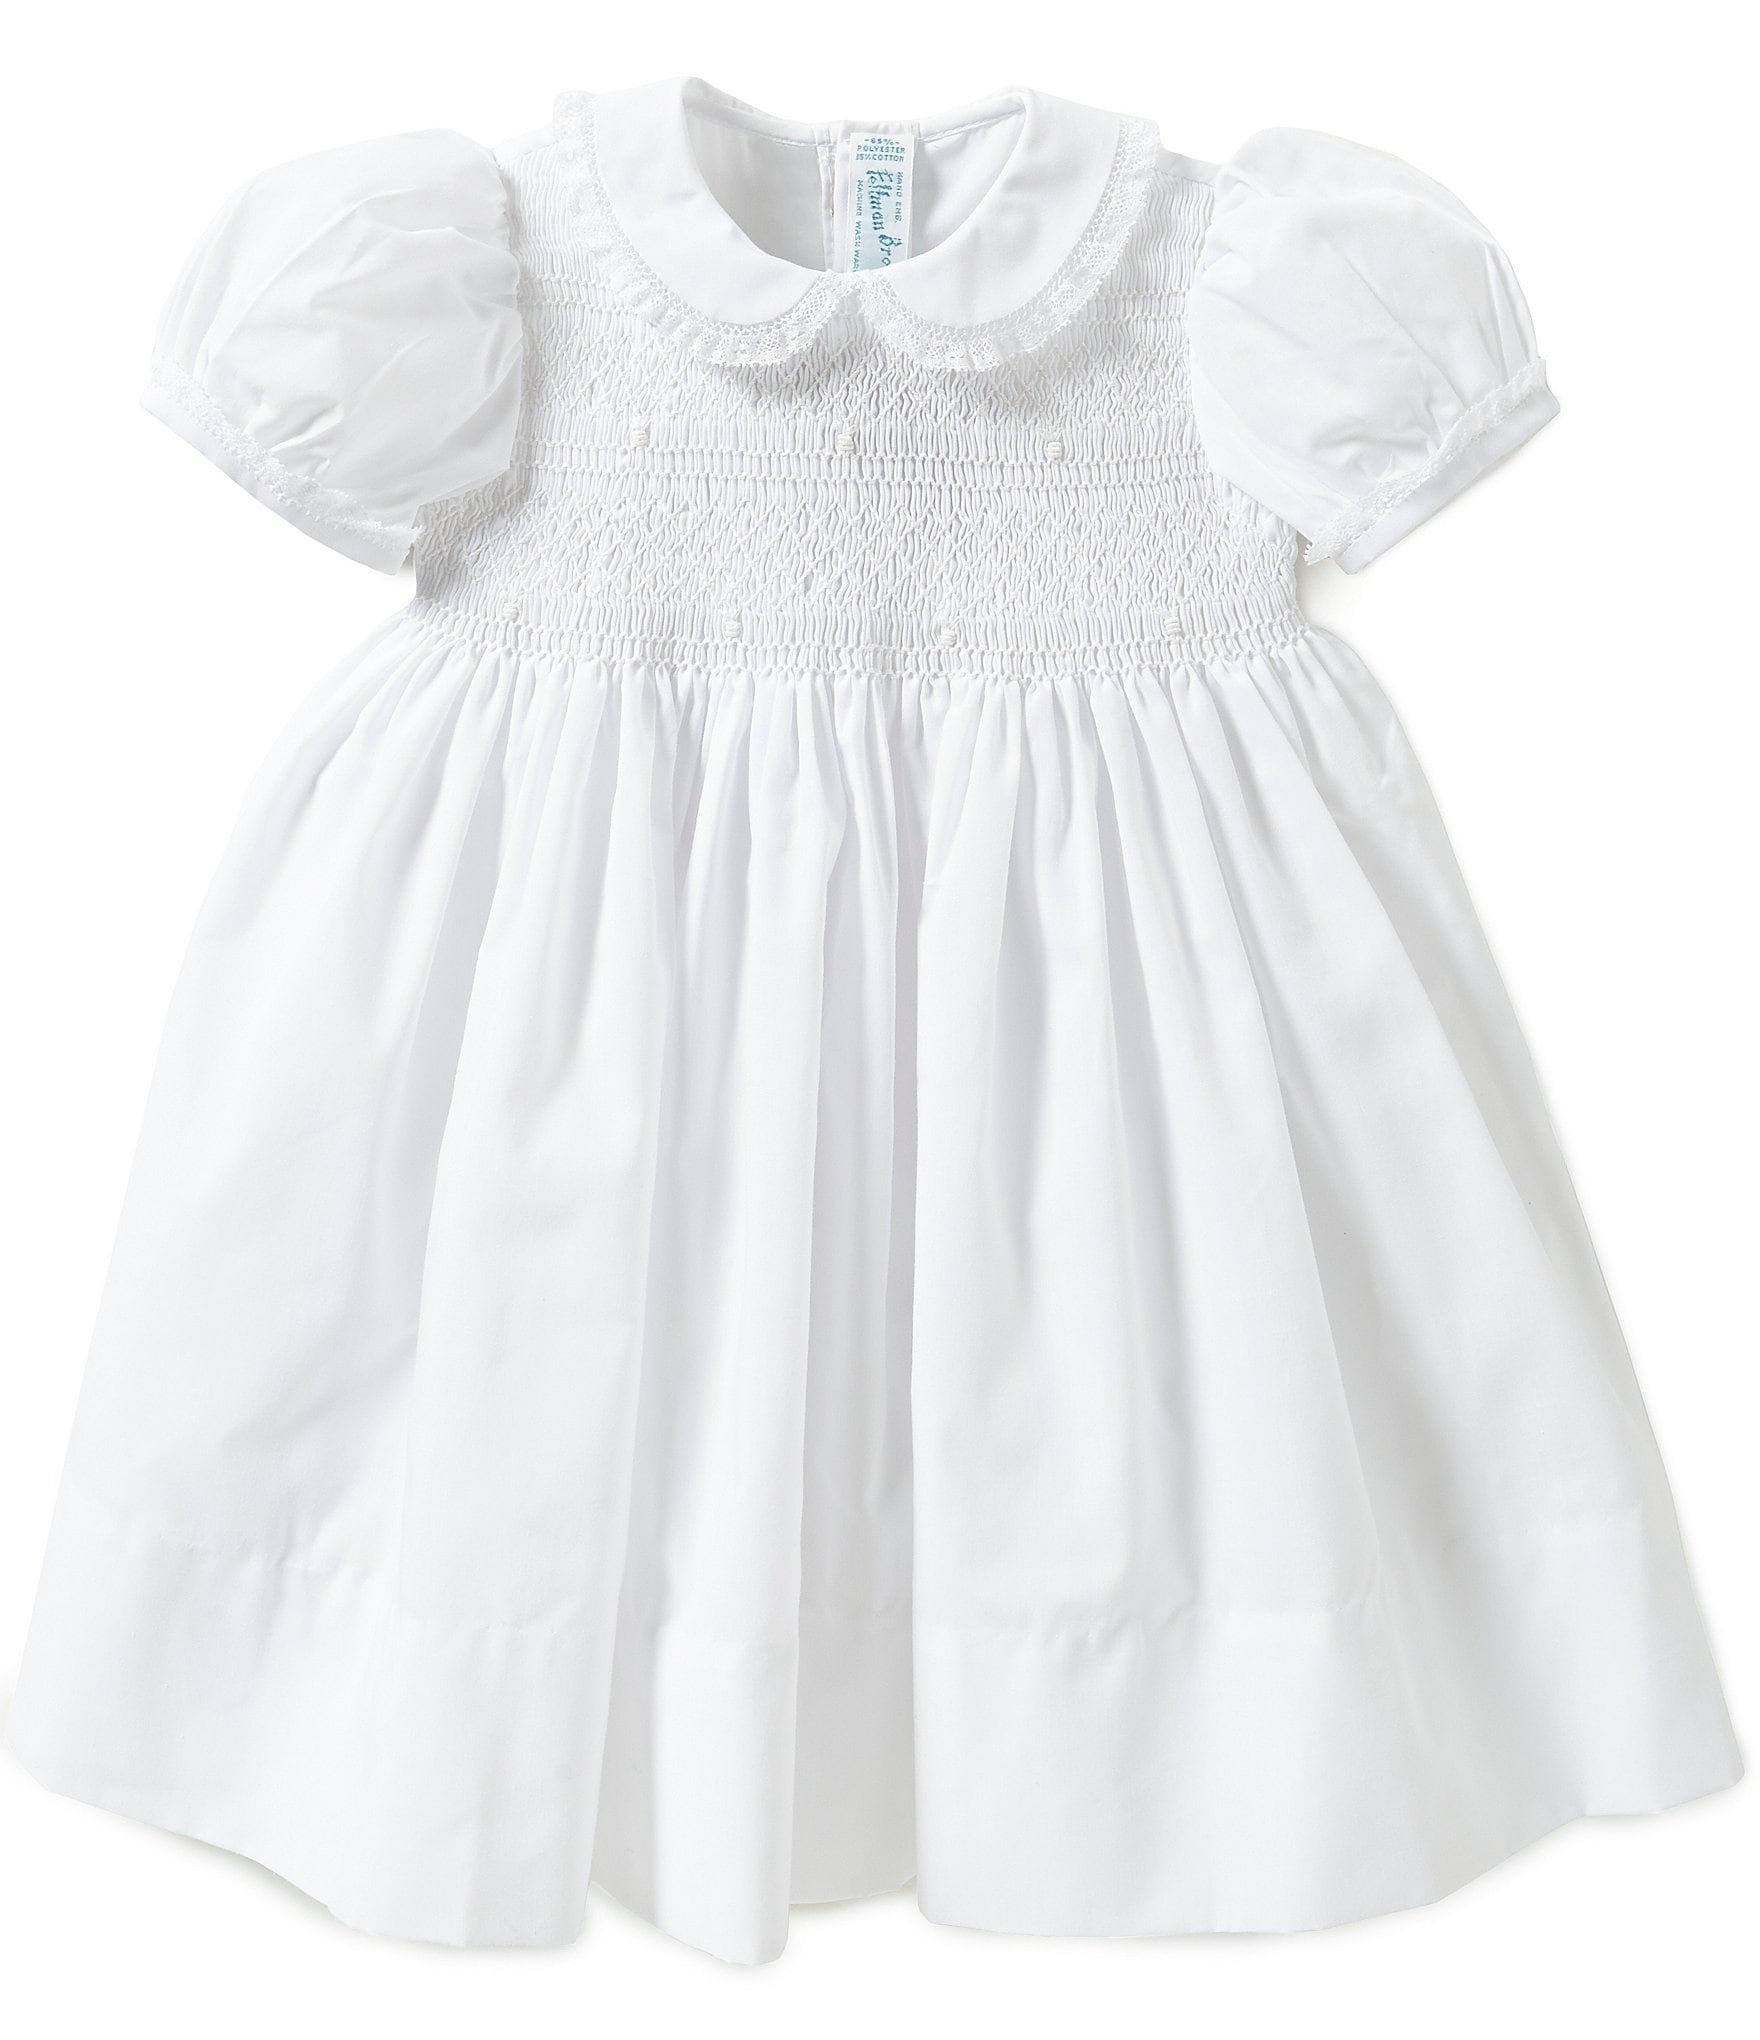 Feltman Brothers Baby Girls 12-24 Months Smocked Lace-Detailed Dress ...